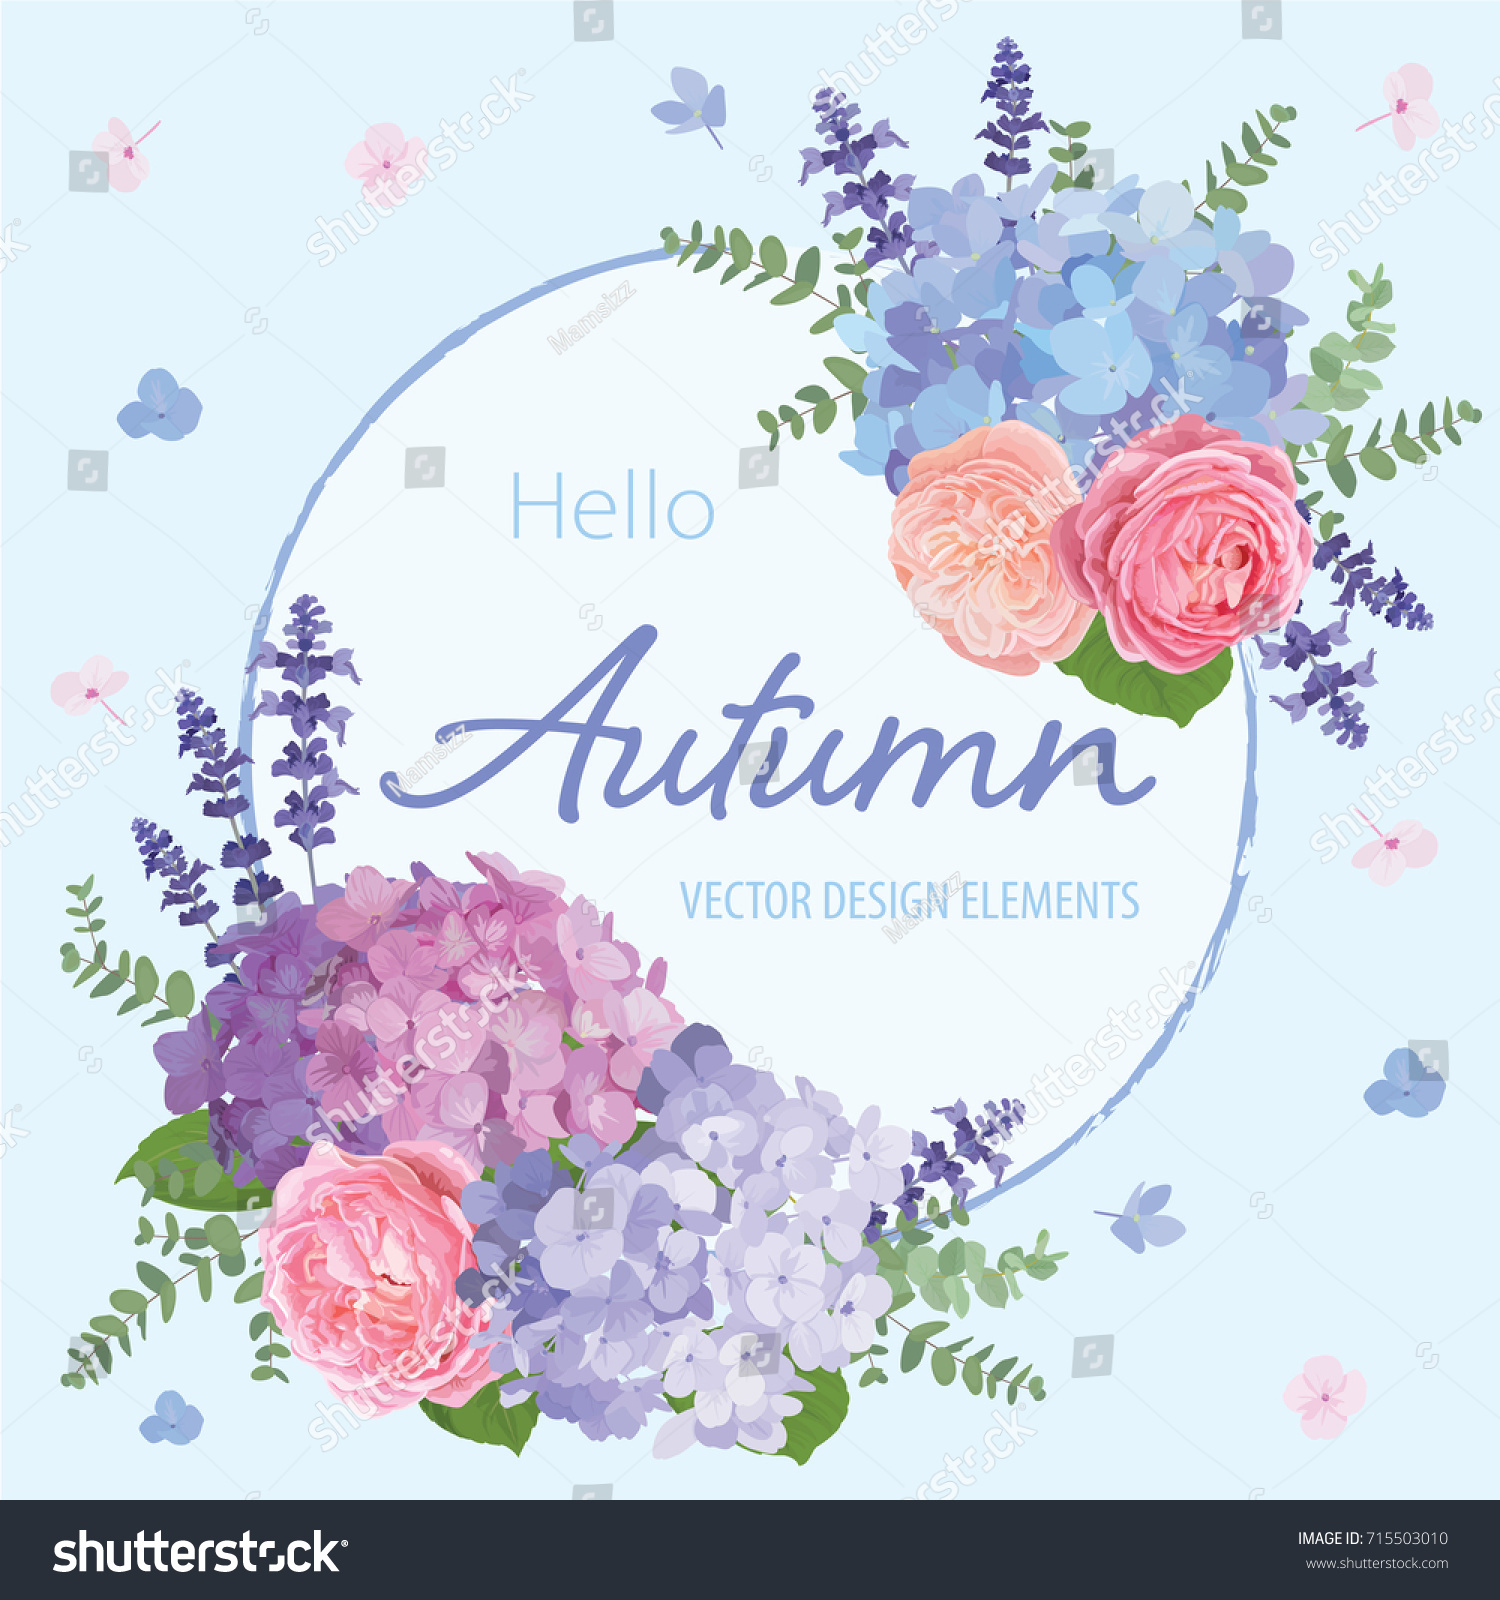 Floral frame with autumn hydrangea flowers, rose, lavender, and leaf on blue in the background. Vector set of blooming flower for your design. Adornment for wedding invitations and greeting card. #715503010